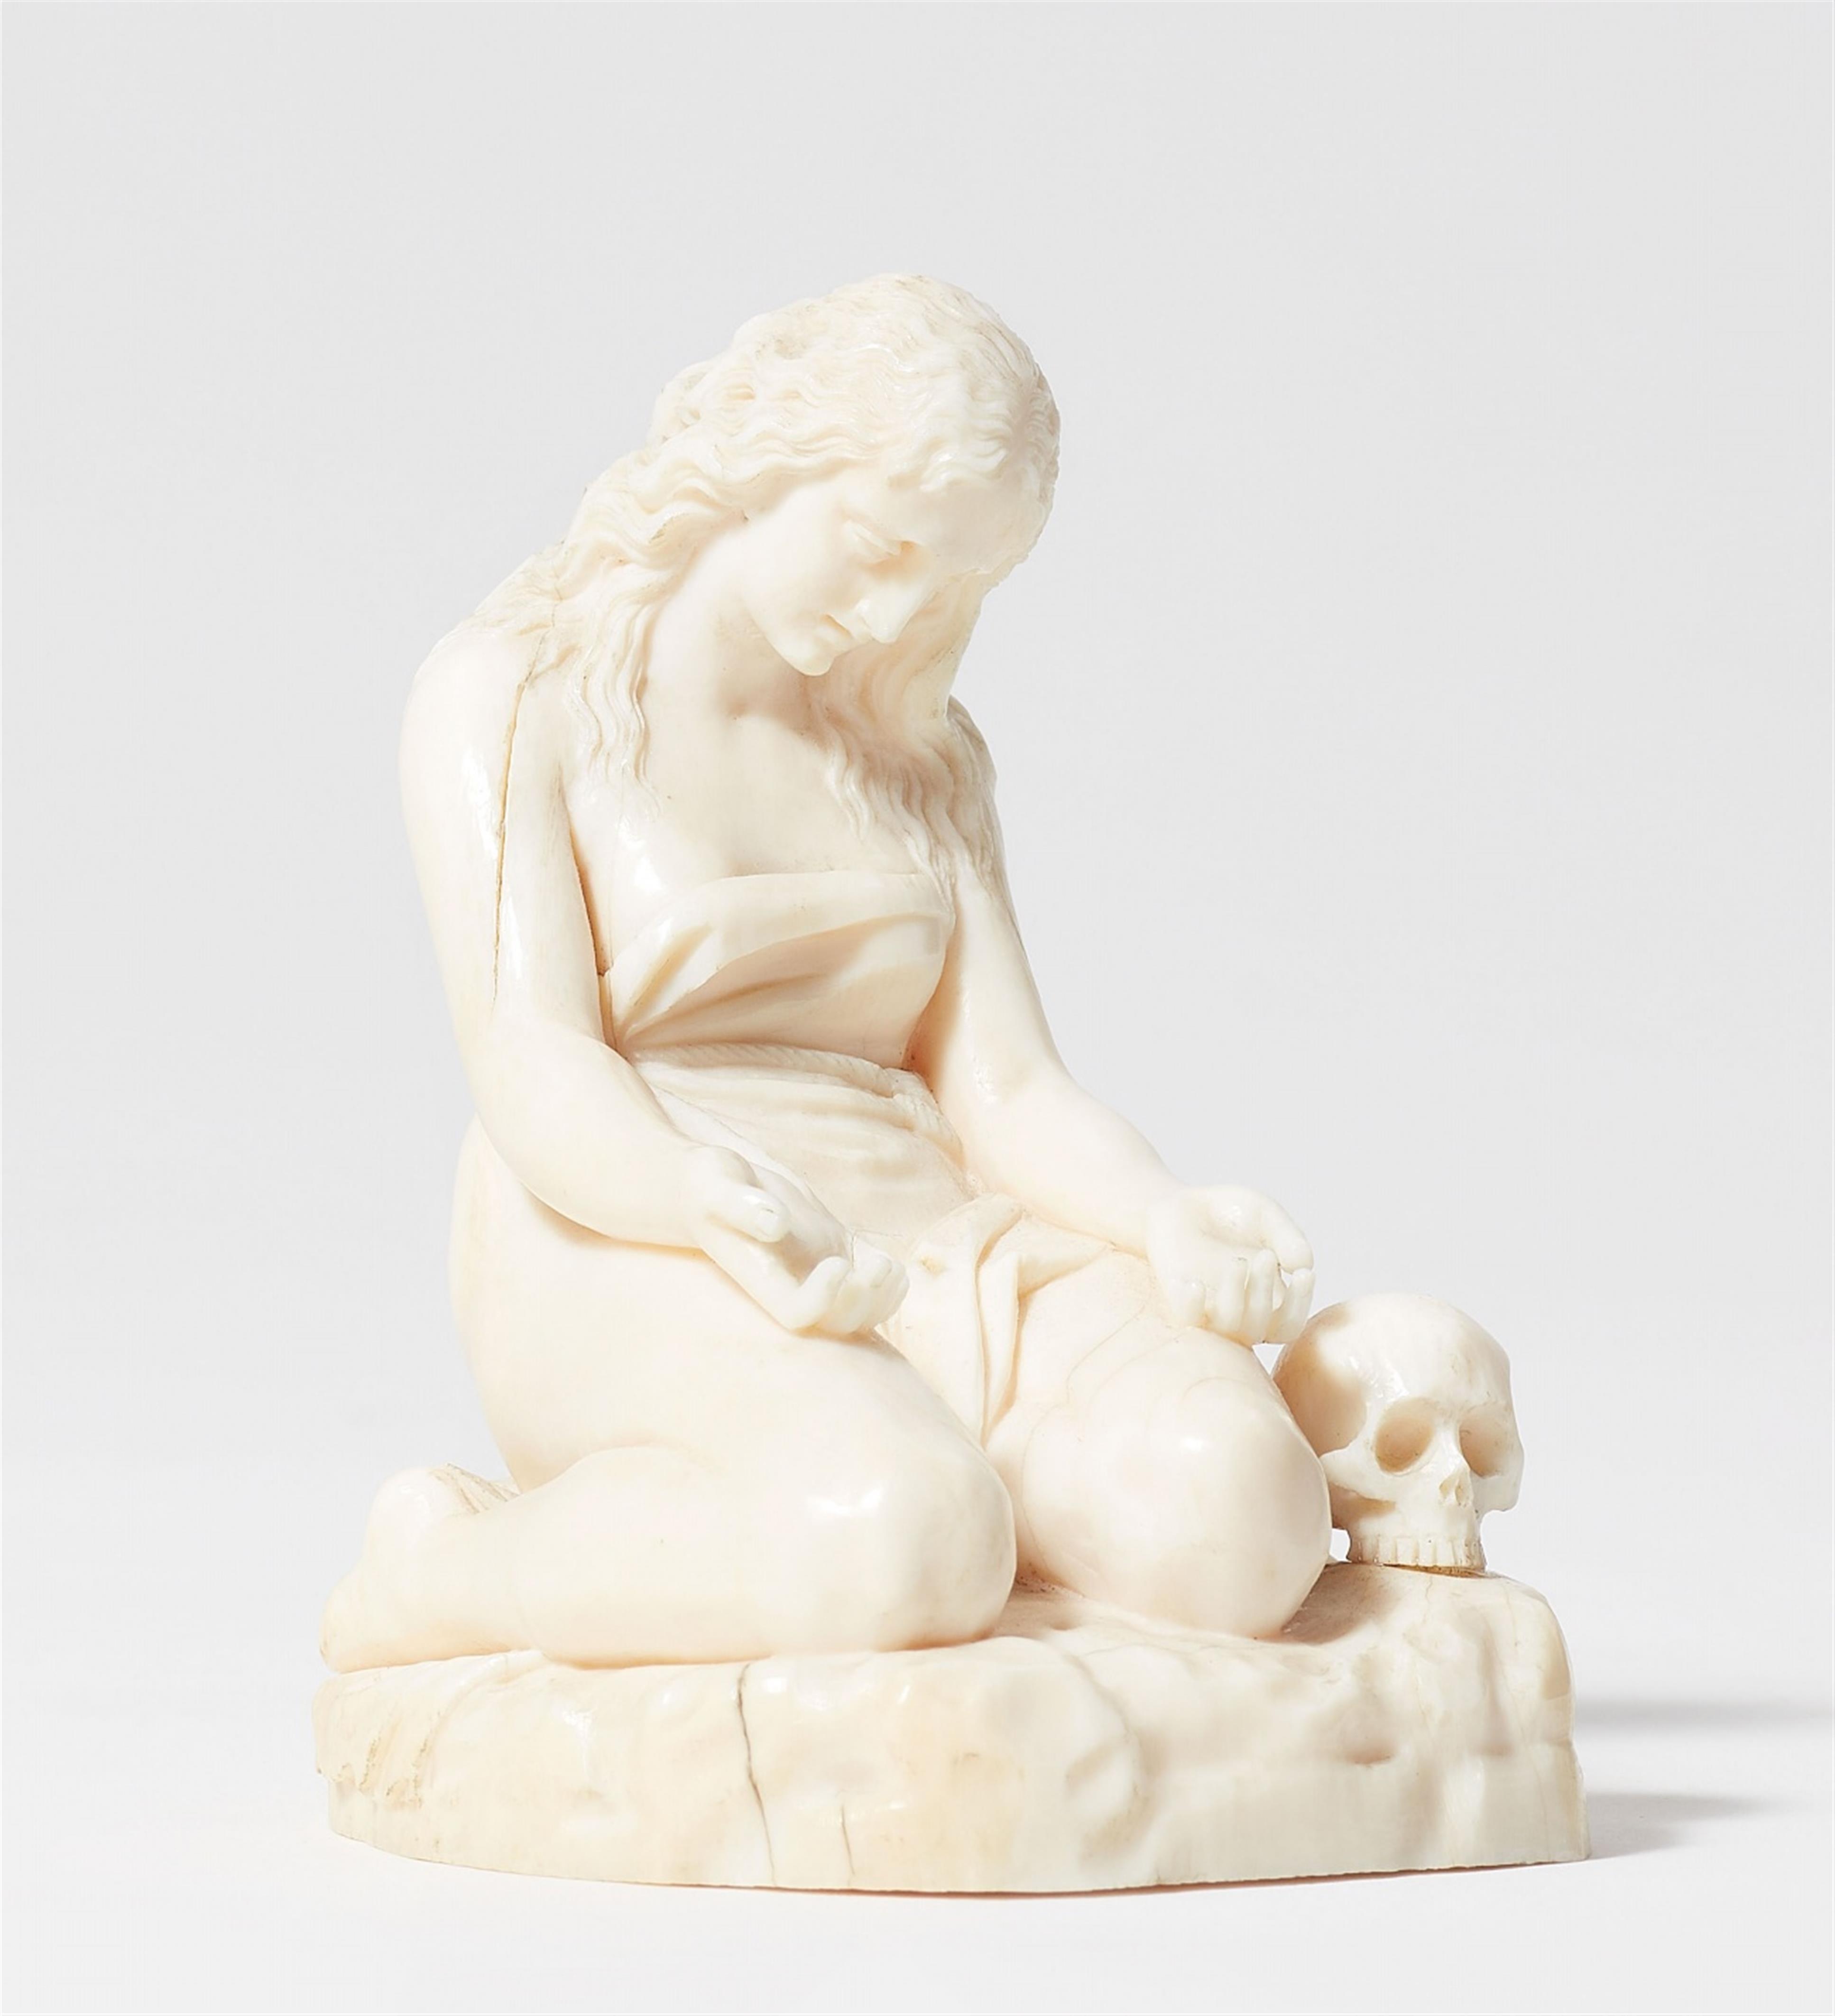 Italy around 1800/1810 - An Italian carved ivory figure of the penitent Mary Magdalene, around 1800/1810 - image-1